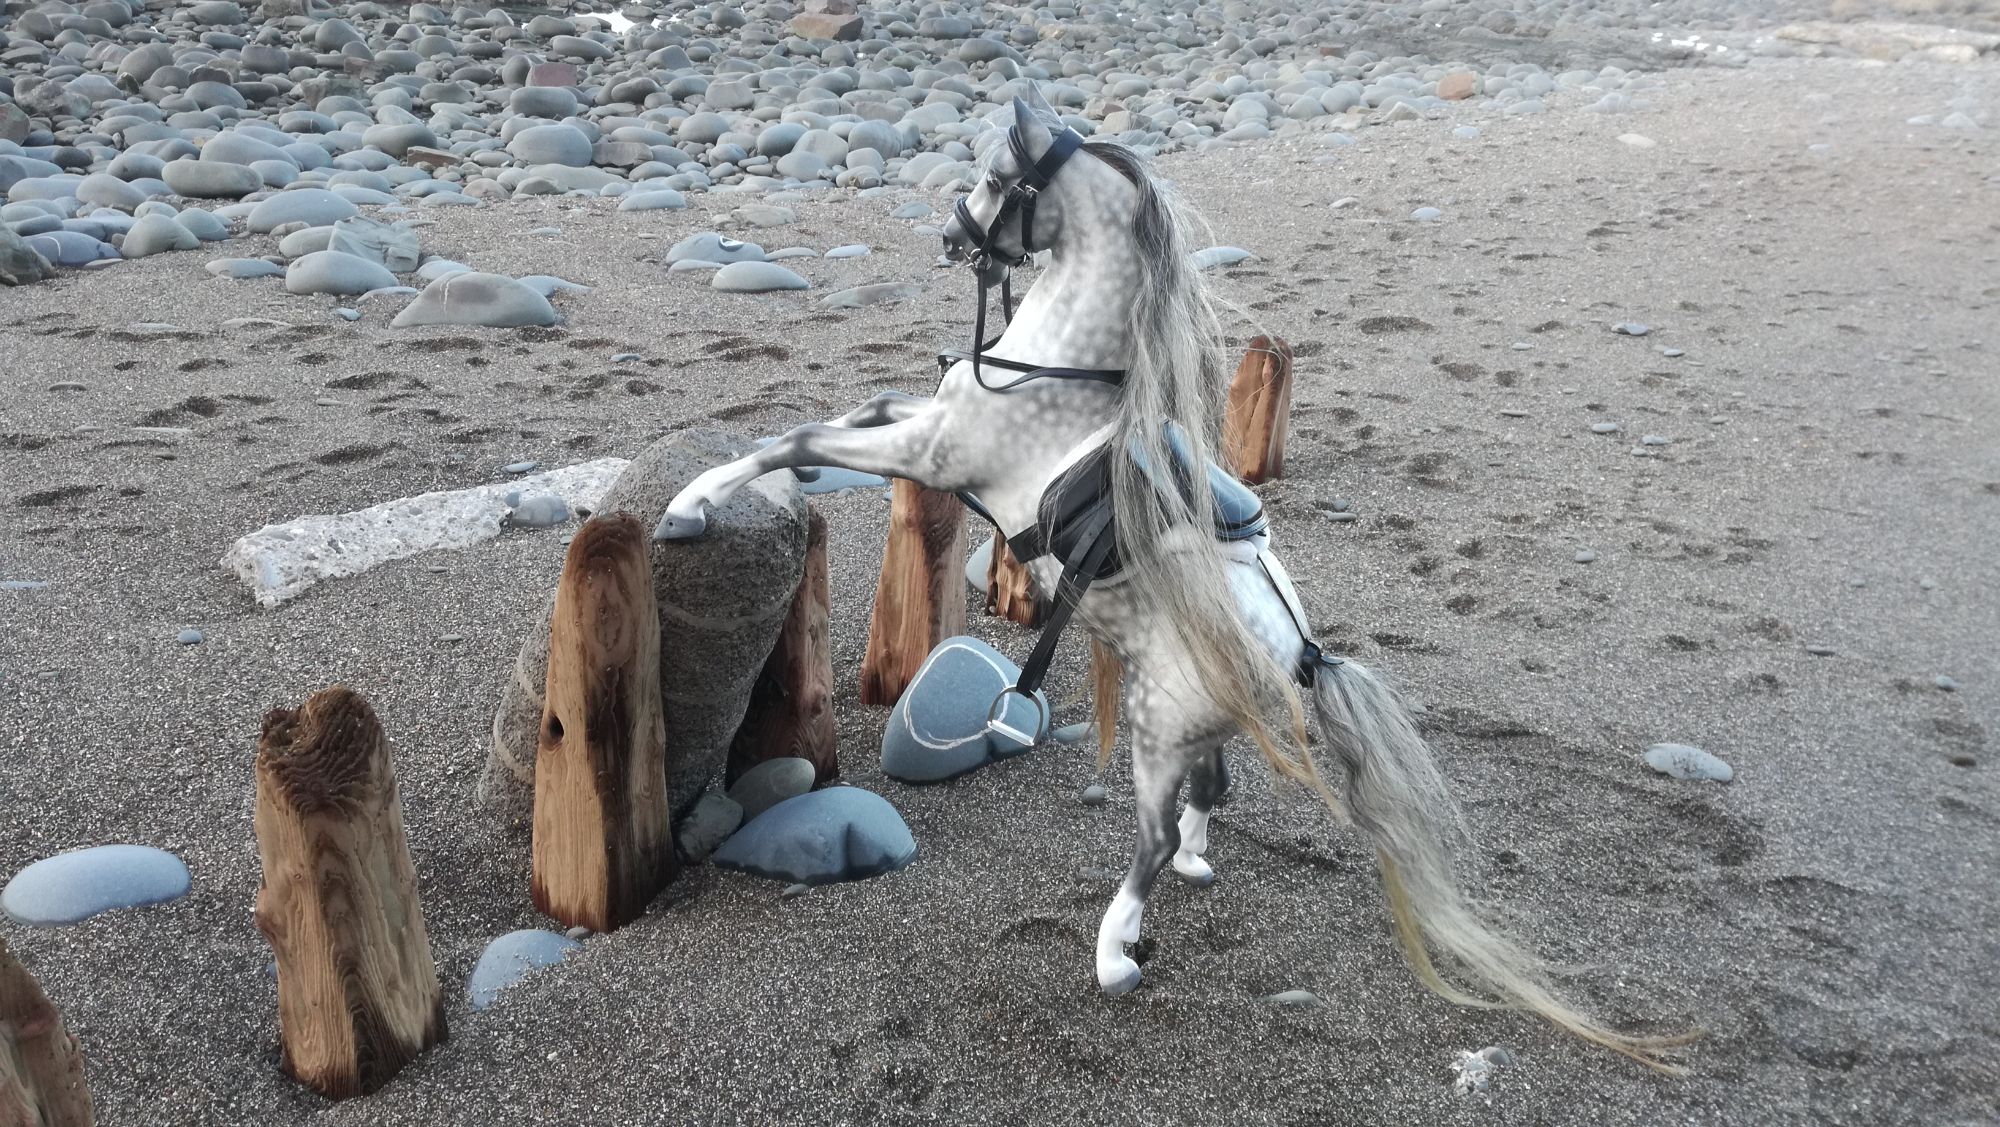 Restored Haddon rocking horse in a realistic style